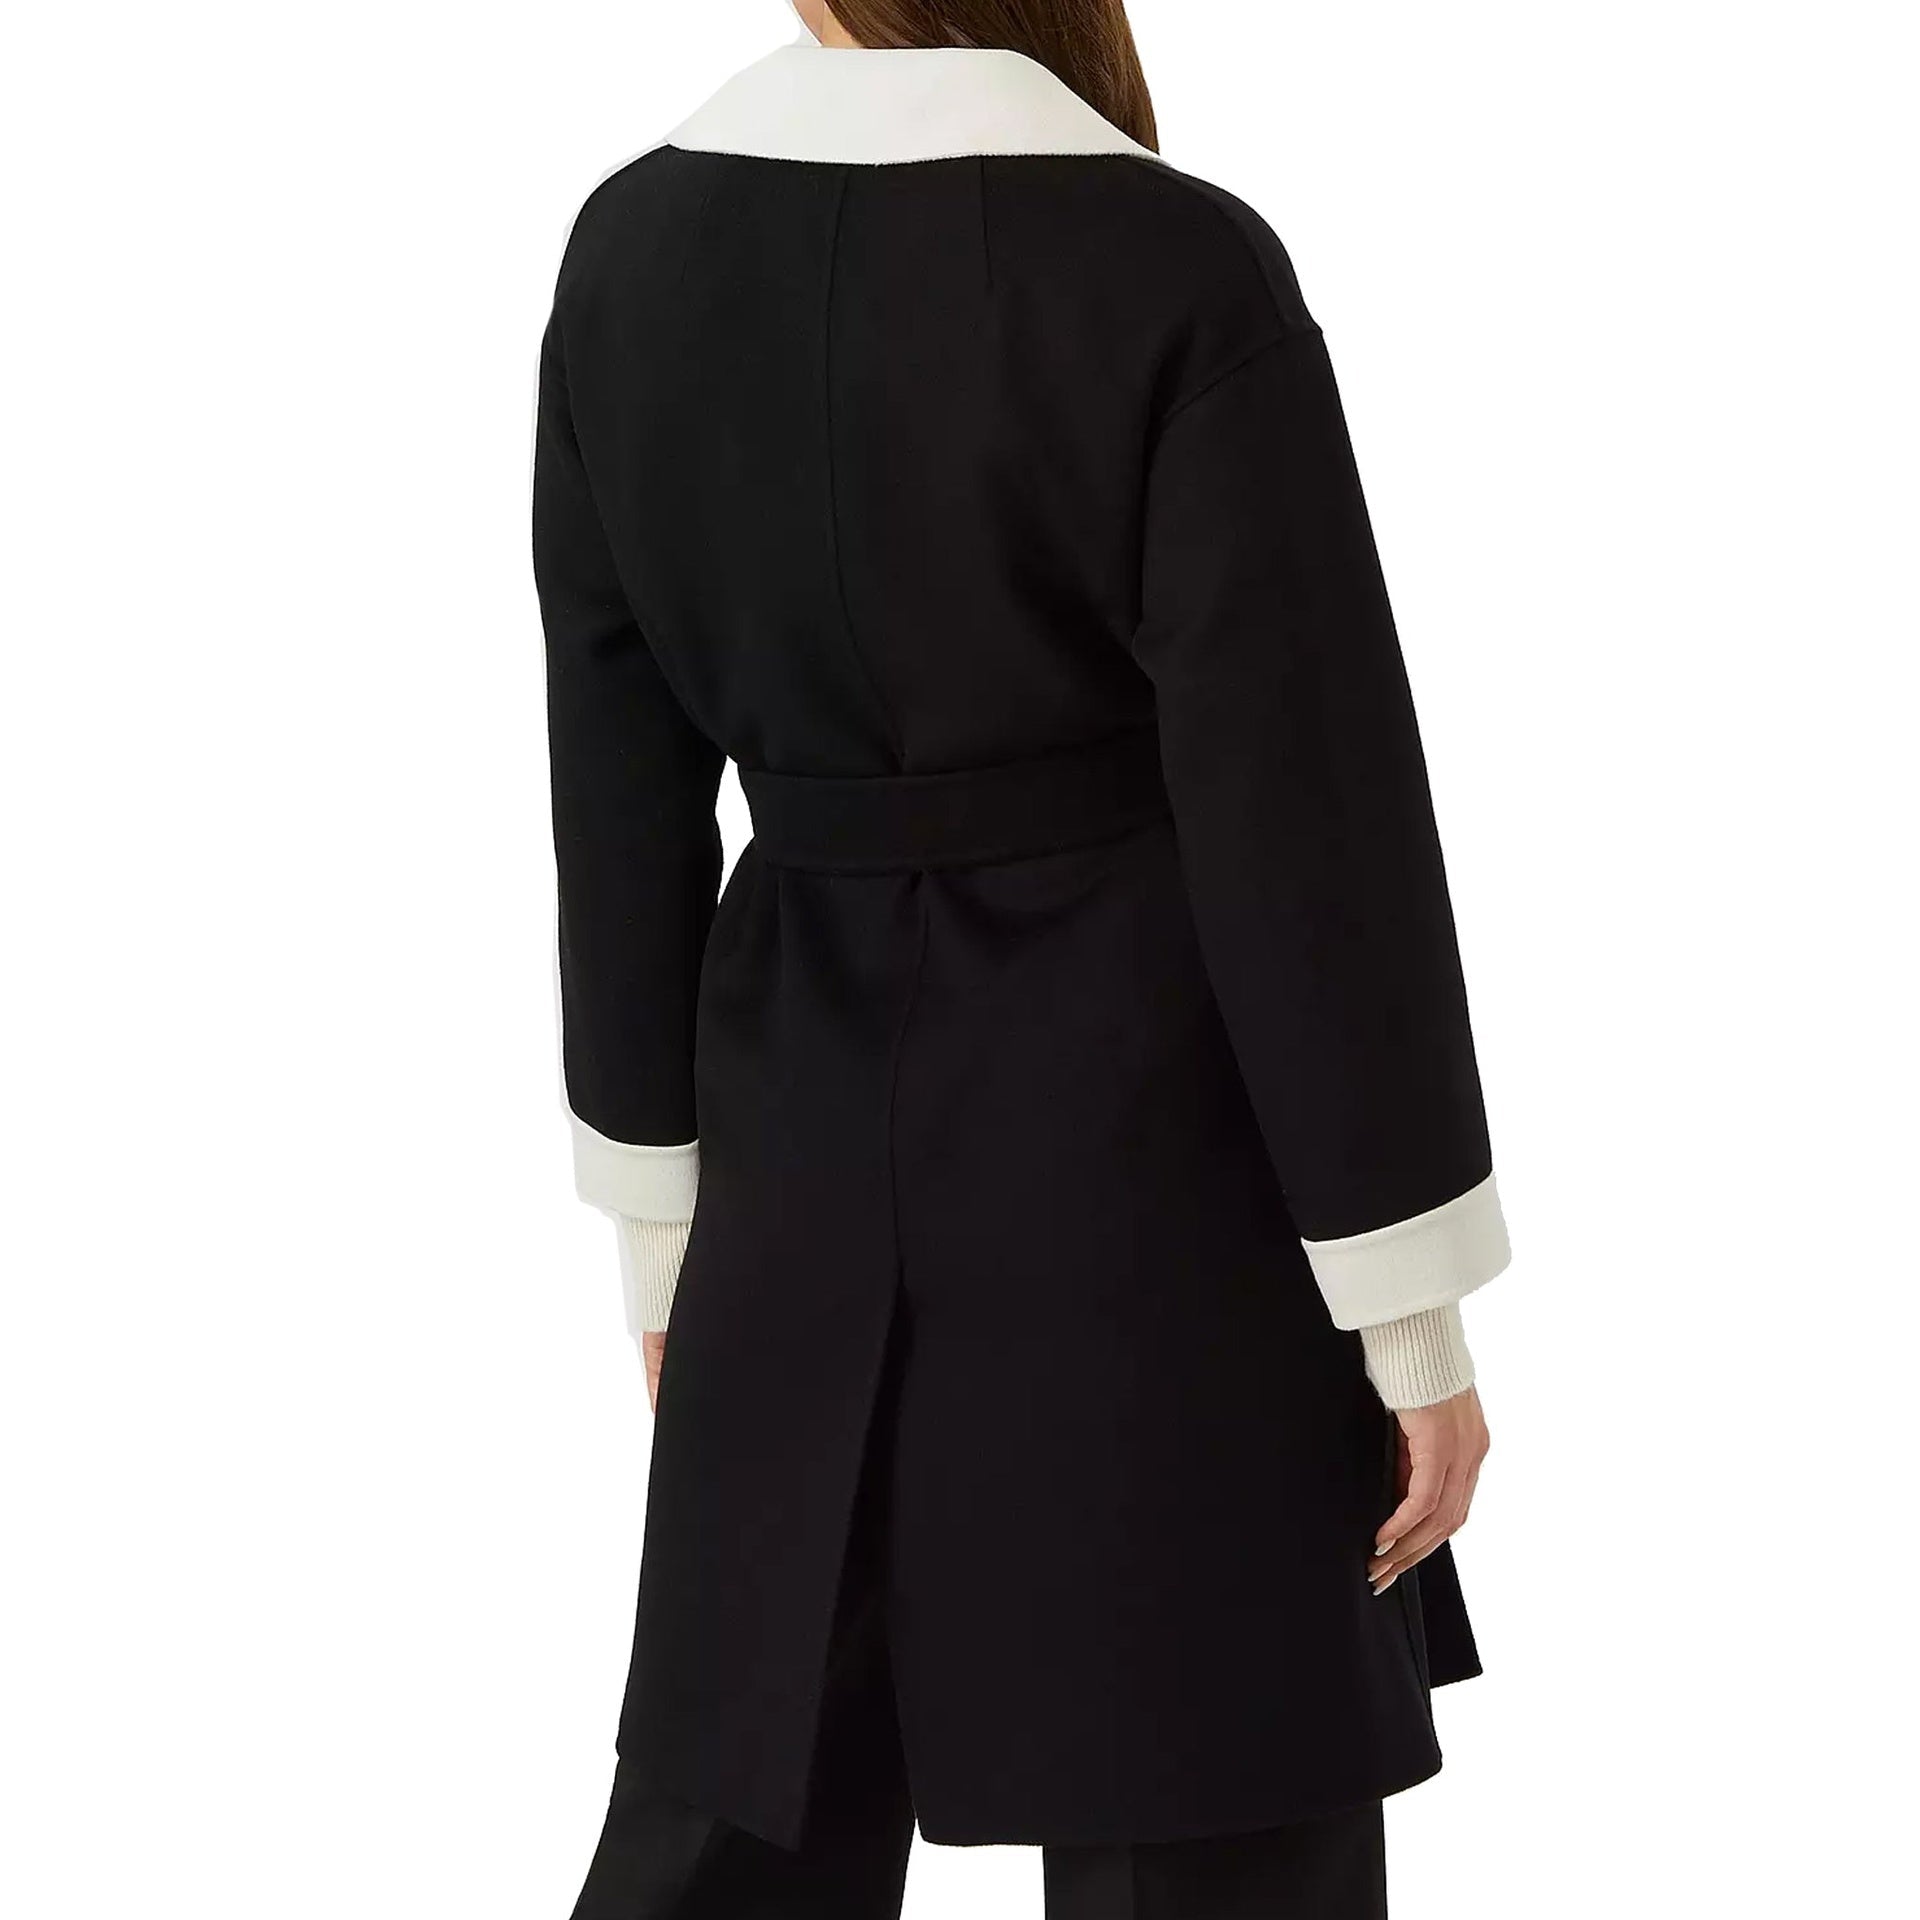 S-MAX-MARA-OUTLET-SALE-s-Max-Mara-Ada-Coat-WOMEN-CLOTHING-BLACK-38-ARCHIVE-COLLECTION-3.jpg